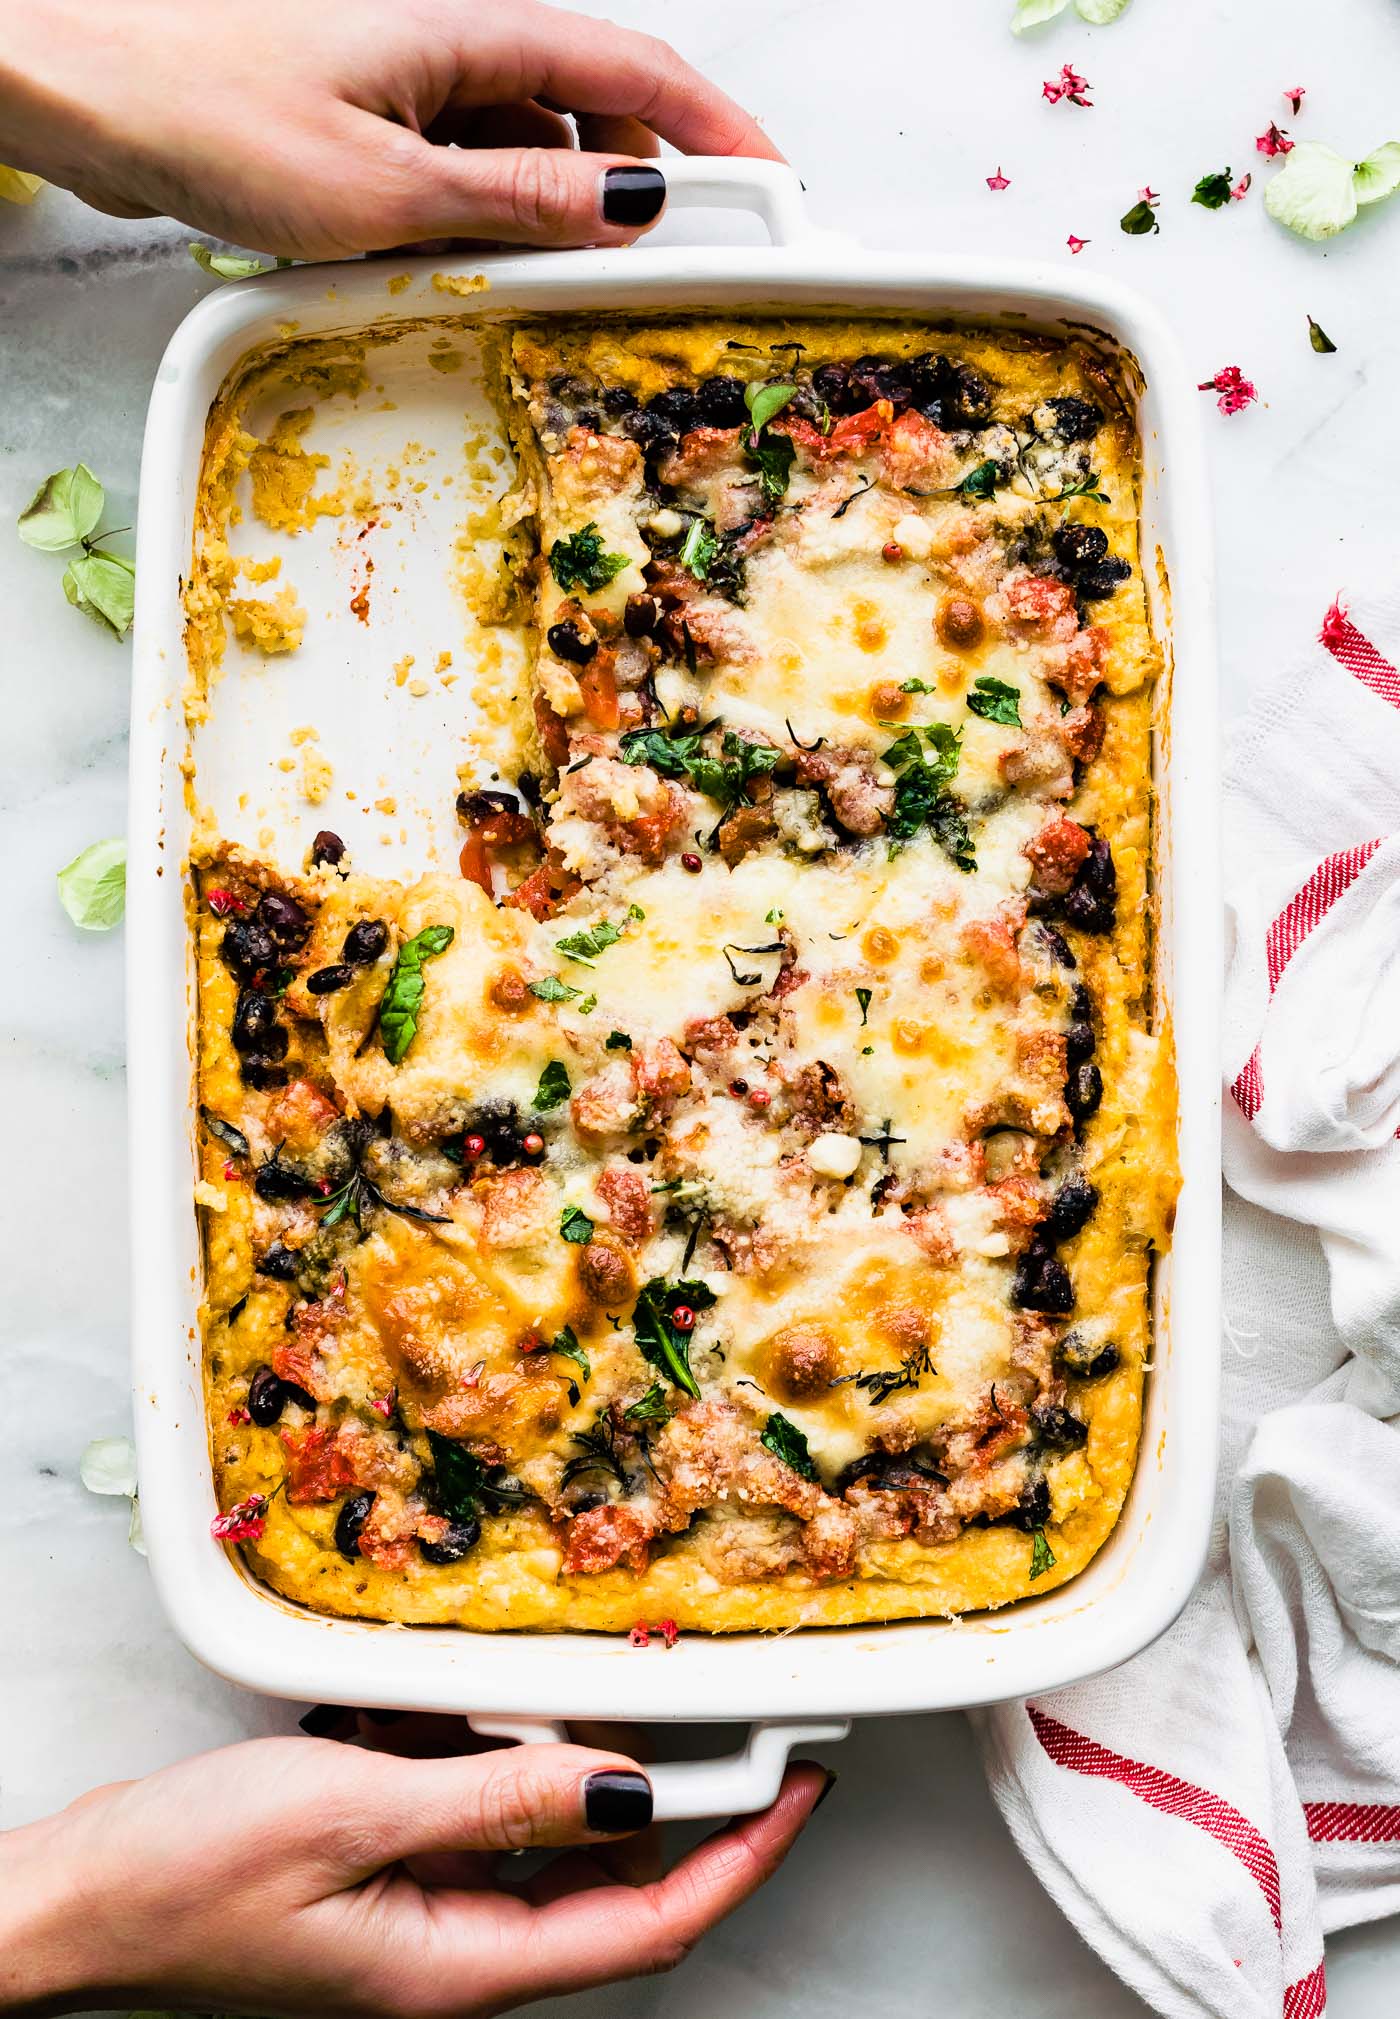 two hands holding a casserole dish of black bean & polenta casserole with a serving mising